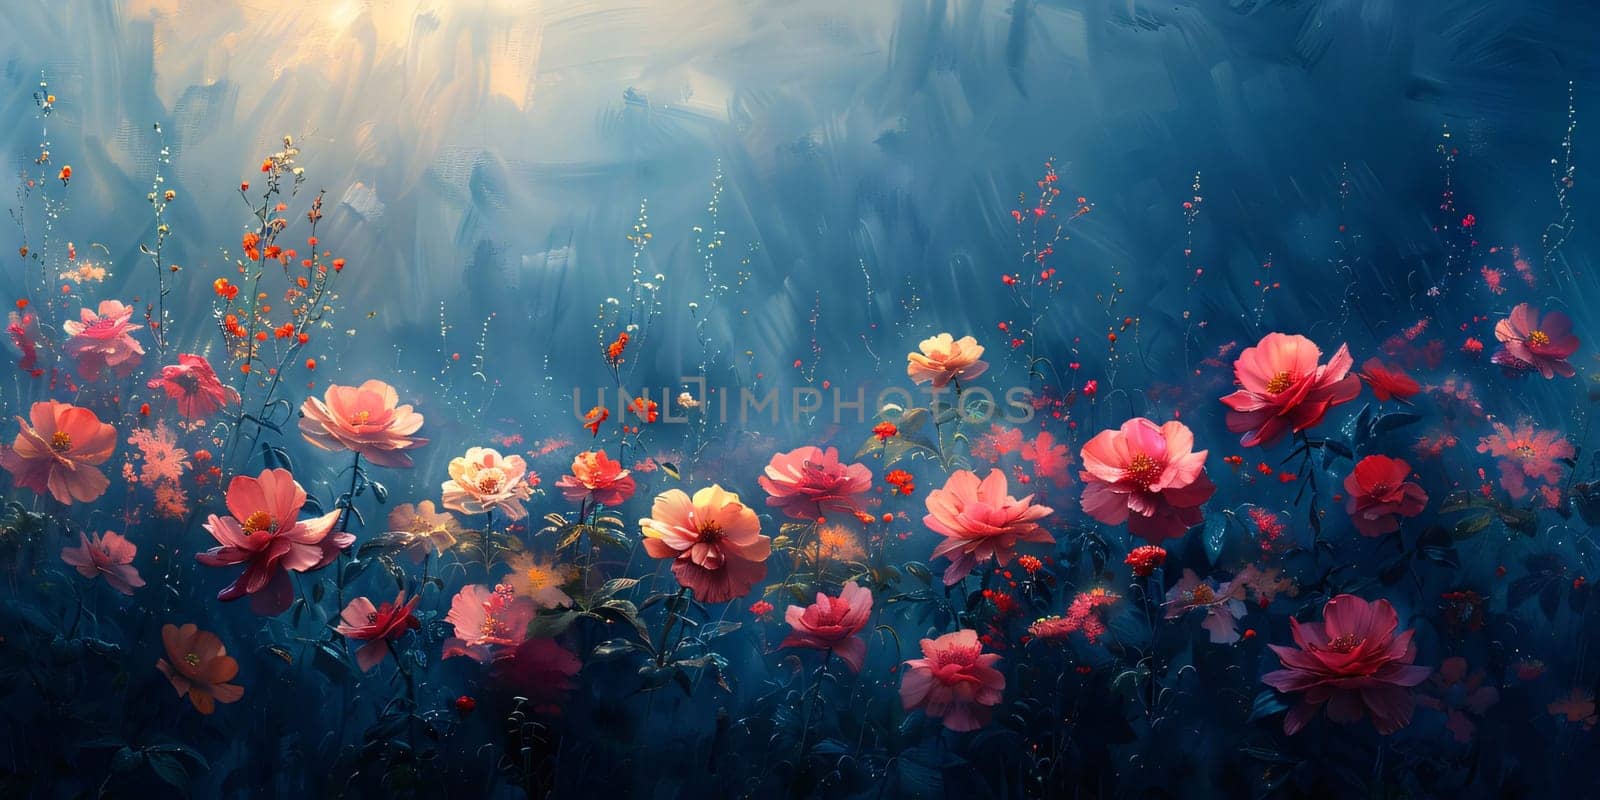 Red flowers, poppies on a dark background, banner with space for your own content. Flowering flowers, a symbol of spring, new life. A joyful time of nature waking up to life.